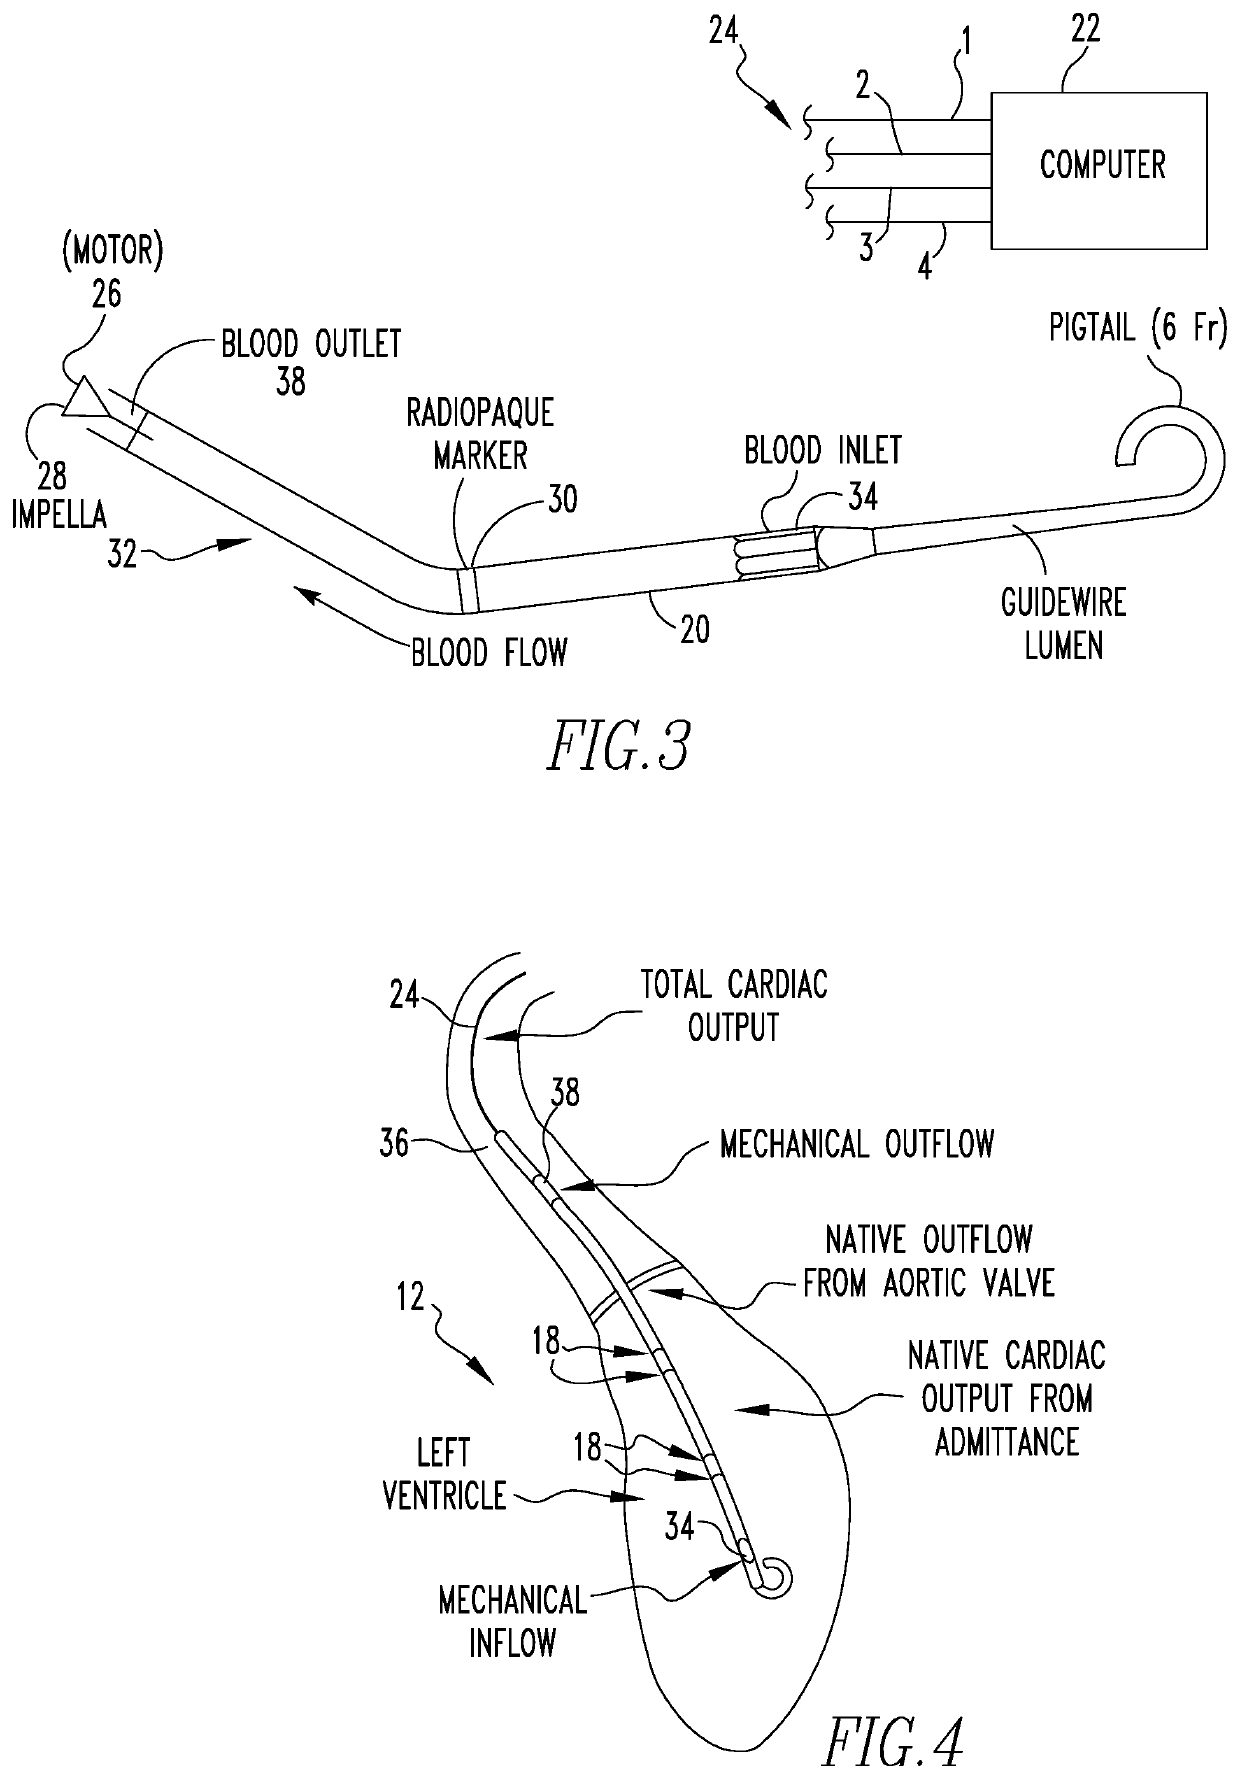 Method and Apparatus for Assisting a Heart